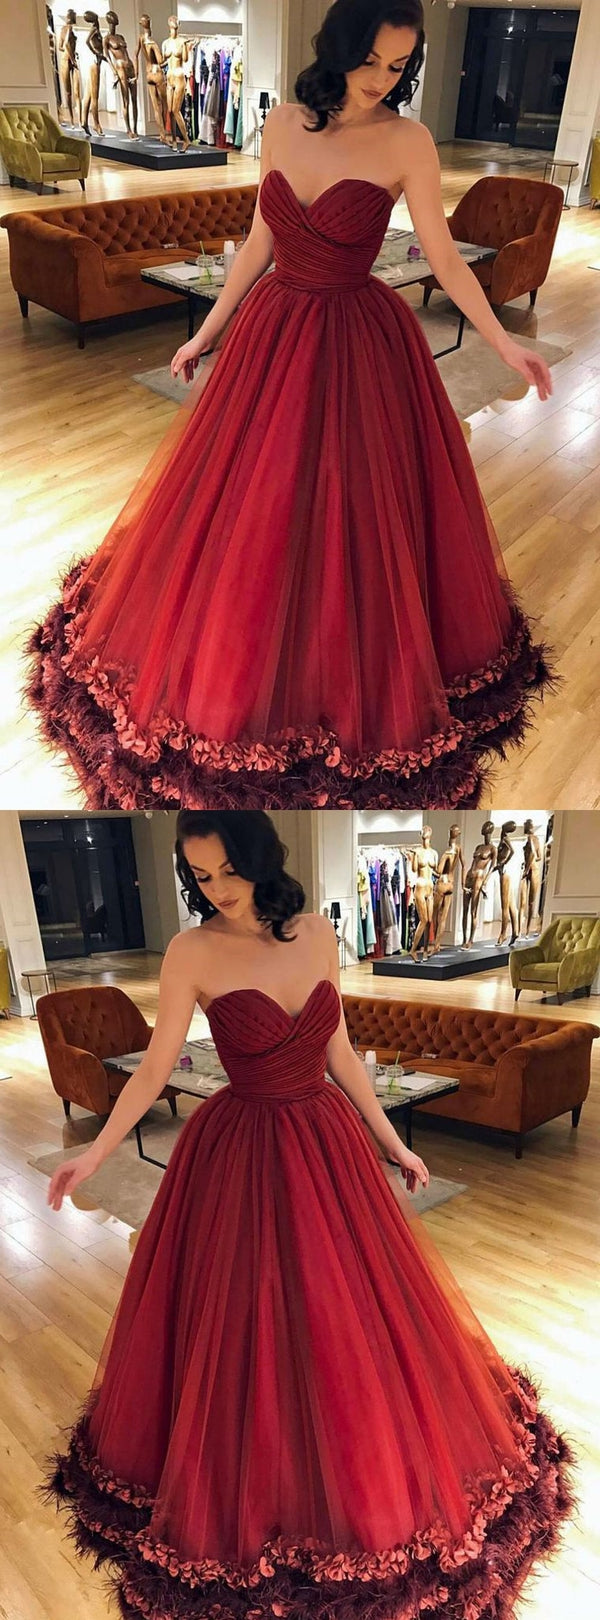 Burgundy Red Black Veiled Ball Gown with Beaded Top – A Lark And A Lady